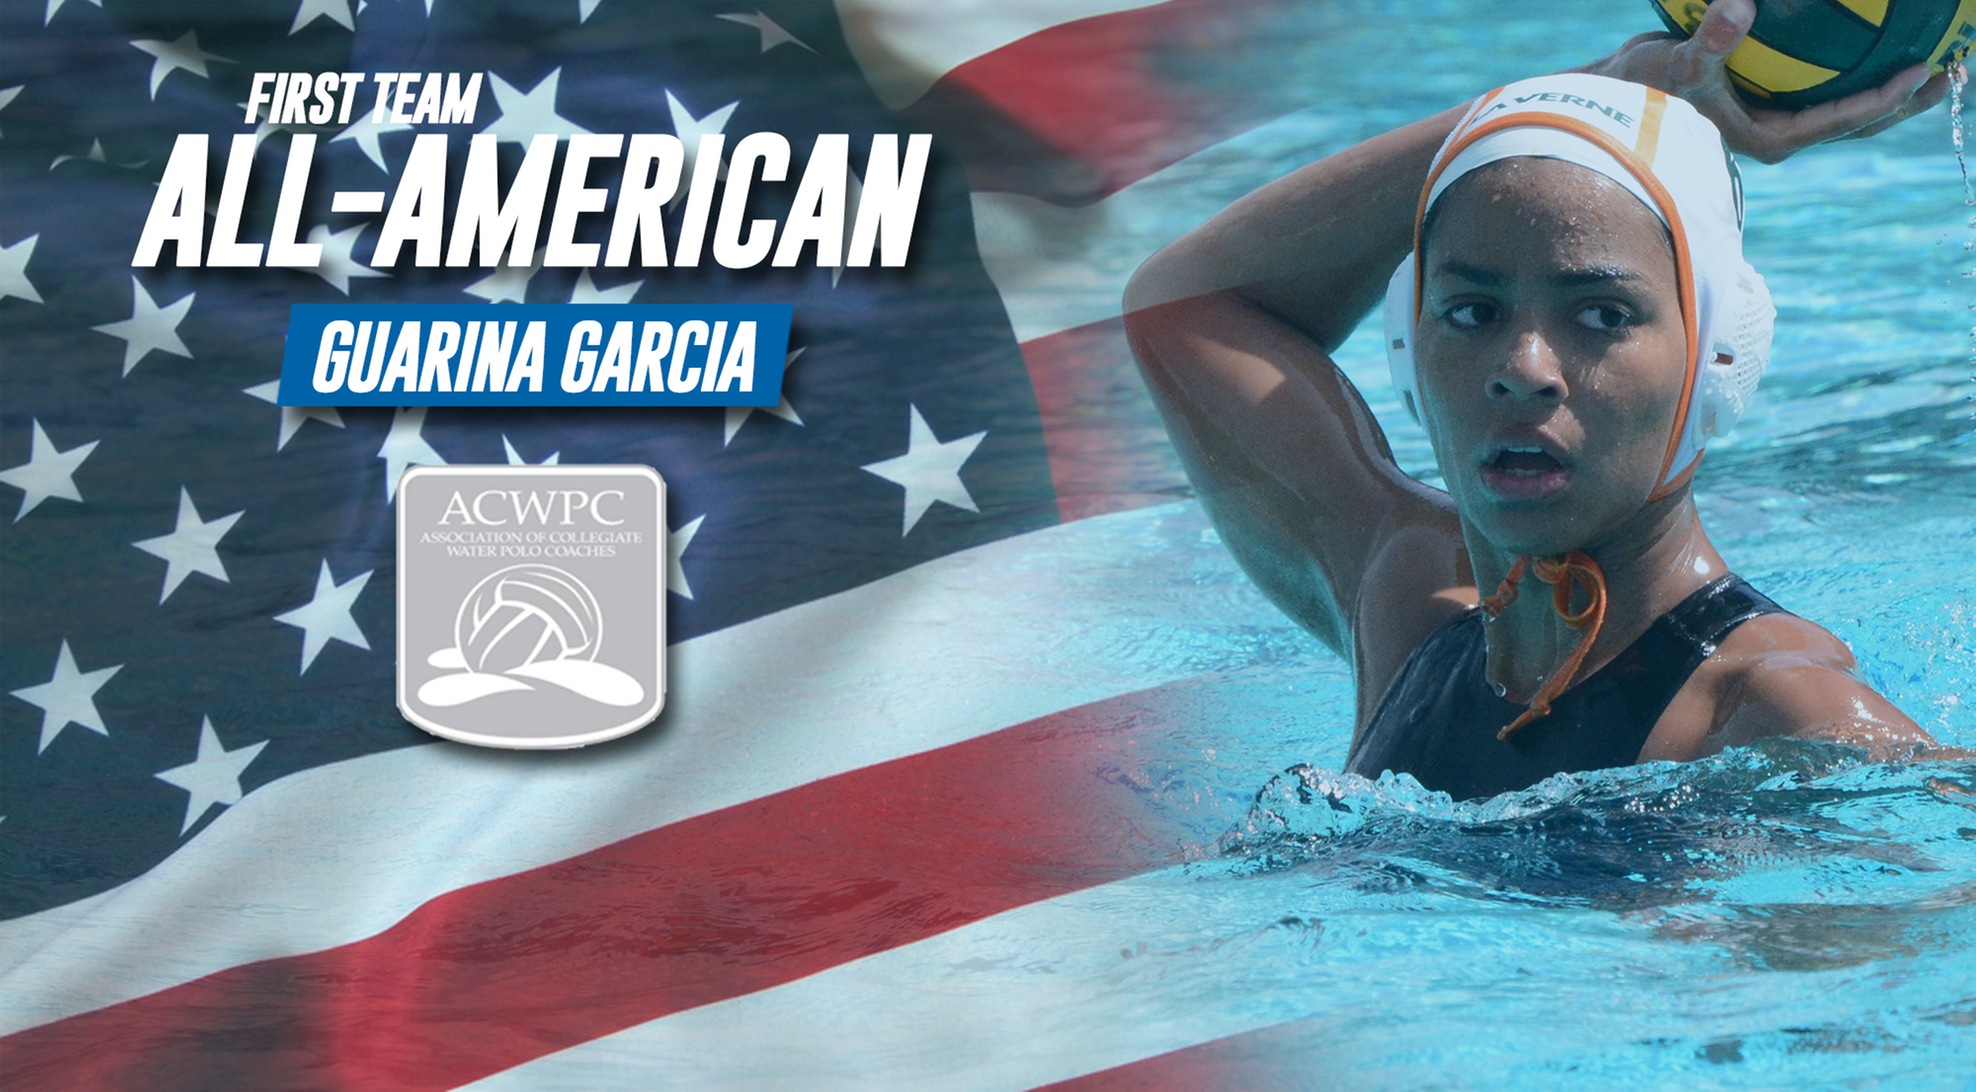 Garcia named ACWPC First Team All-American